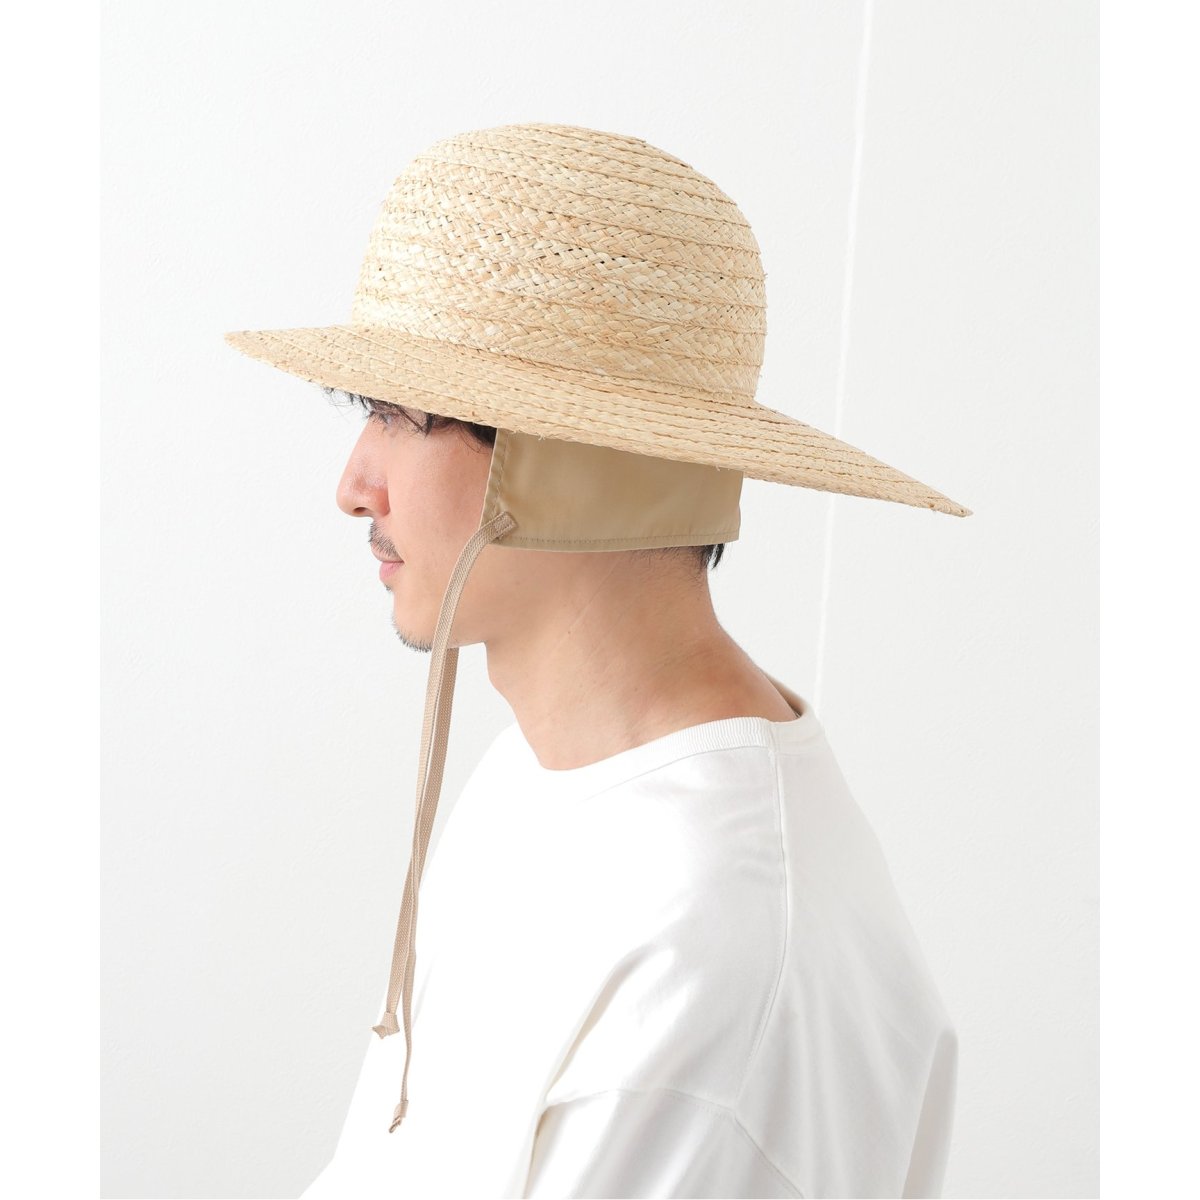 MOUNTAIN RESEARCH/マウンテンリサーチ】Straw hat ストローハット